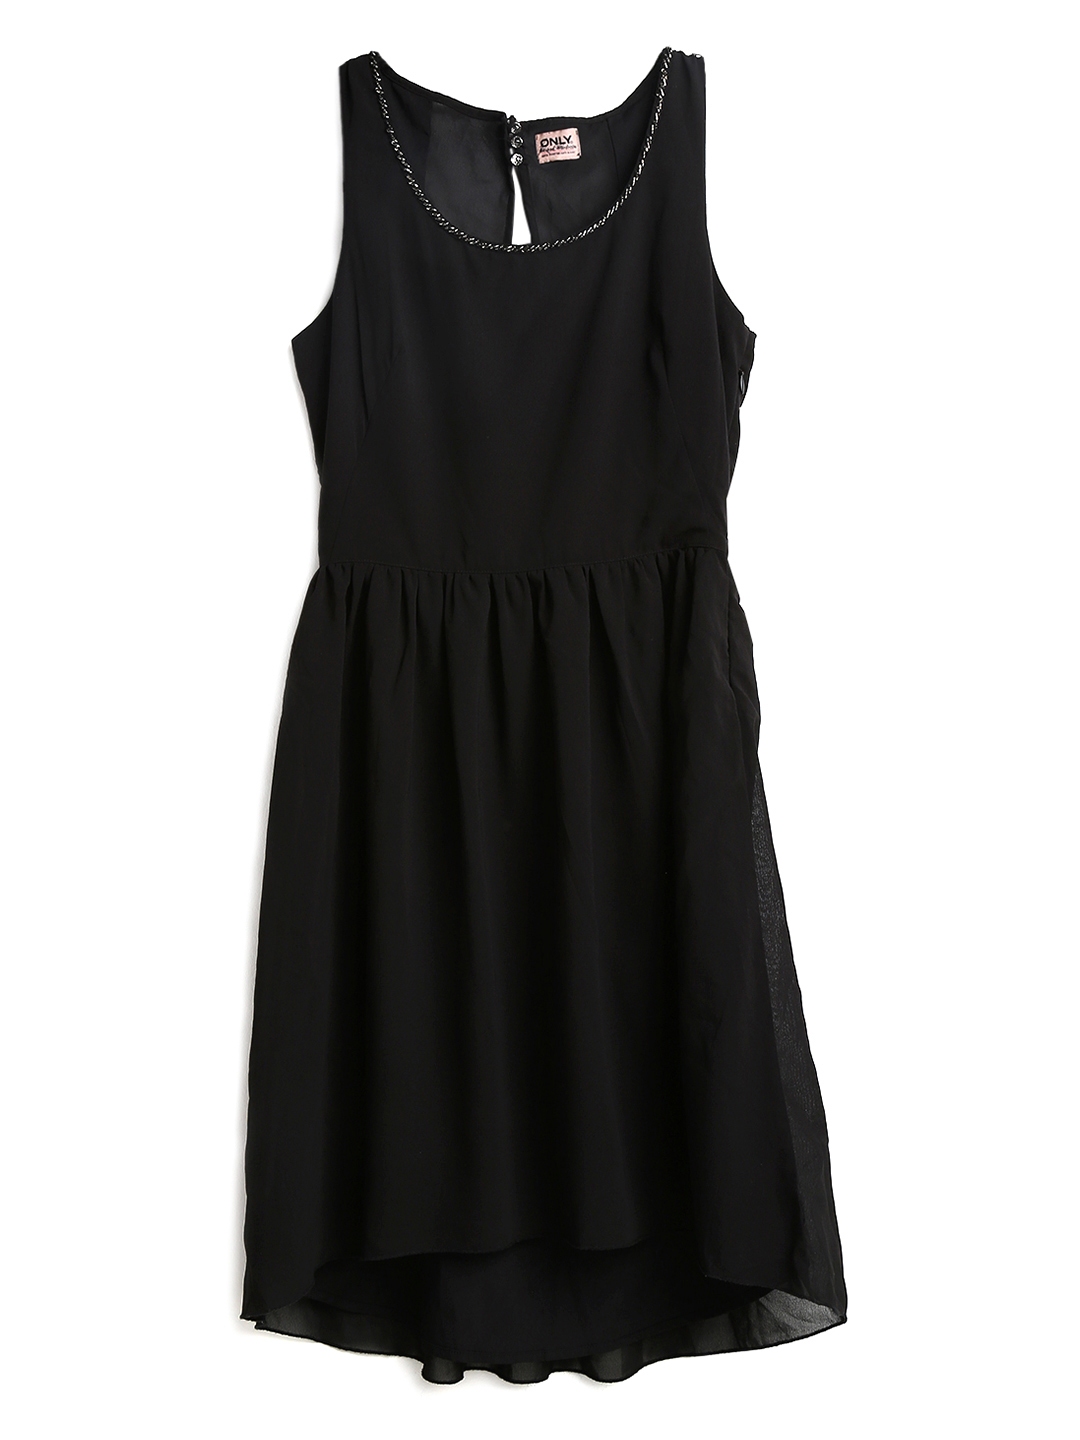 Buy ONLY Black Fit & Flare Dress - Dresses for Women 542396 | Myntra